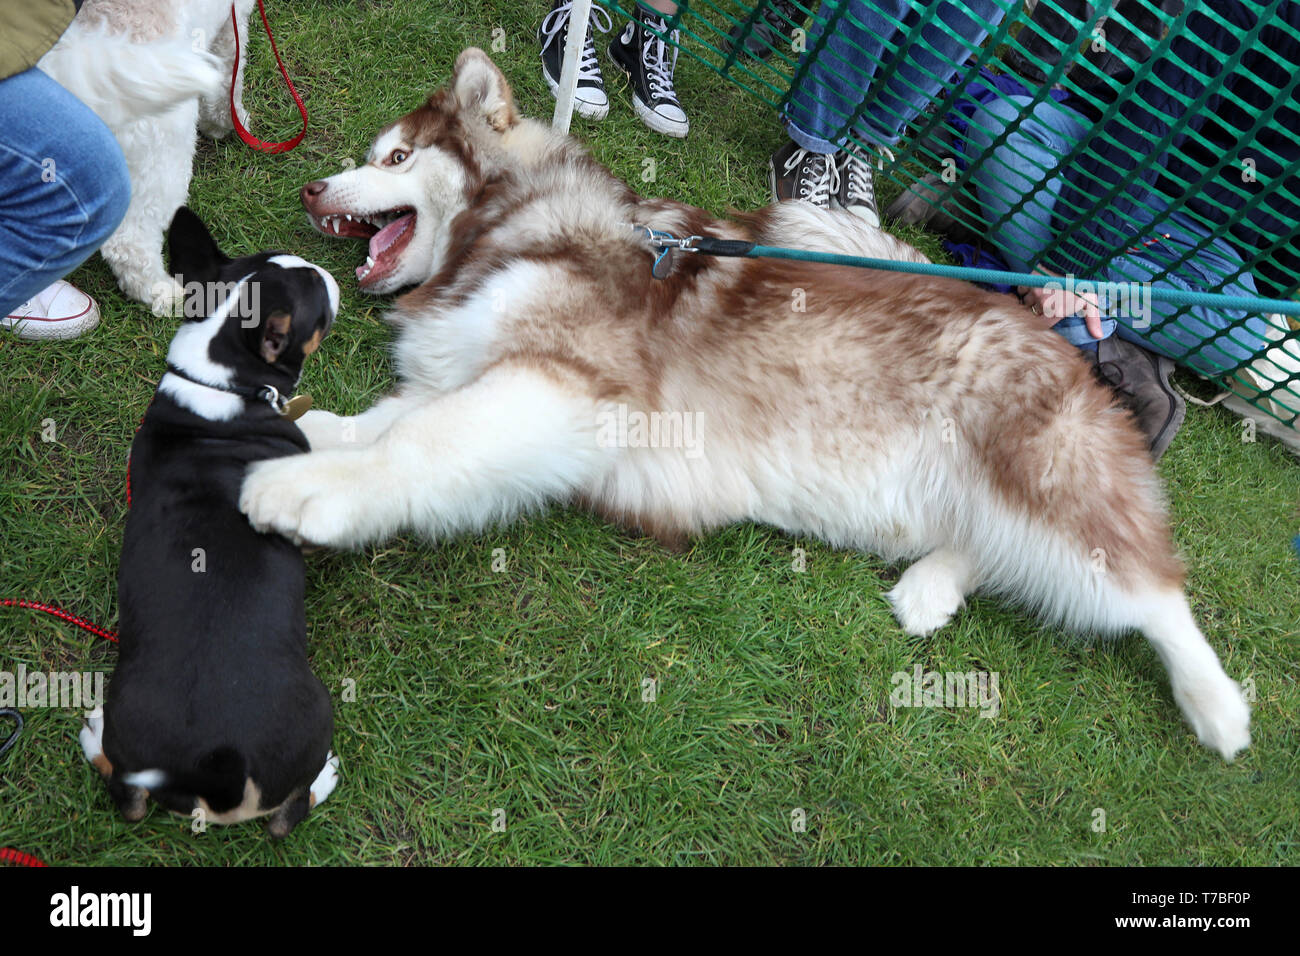 London, UK. 5th May 2019. Oscar the English Bull Terrier puppy (and winner  of Cutest Pup) plays with new giant best friend Vanuatu the Alaskan Malamute  at the All Dogs Matter Bark